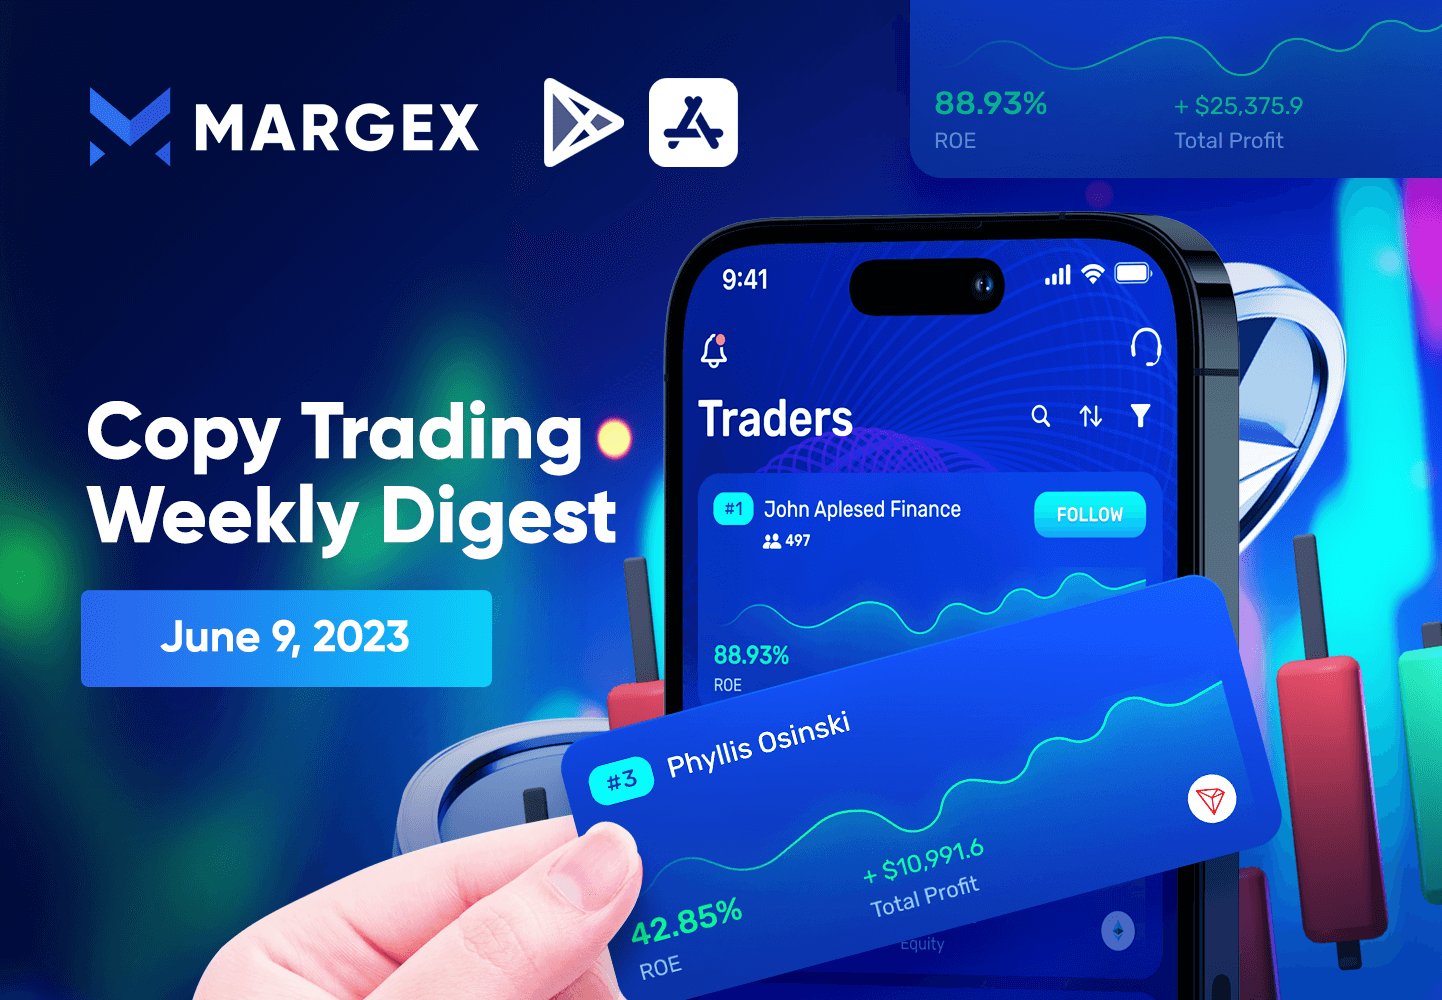 Copy Trading Weekly Digest: June 9, 2023